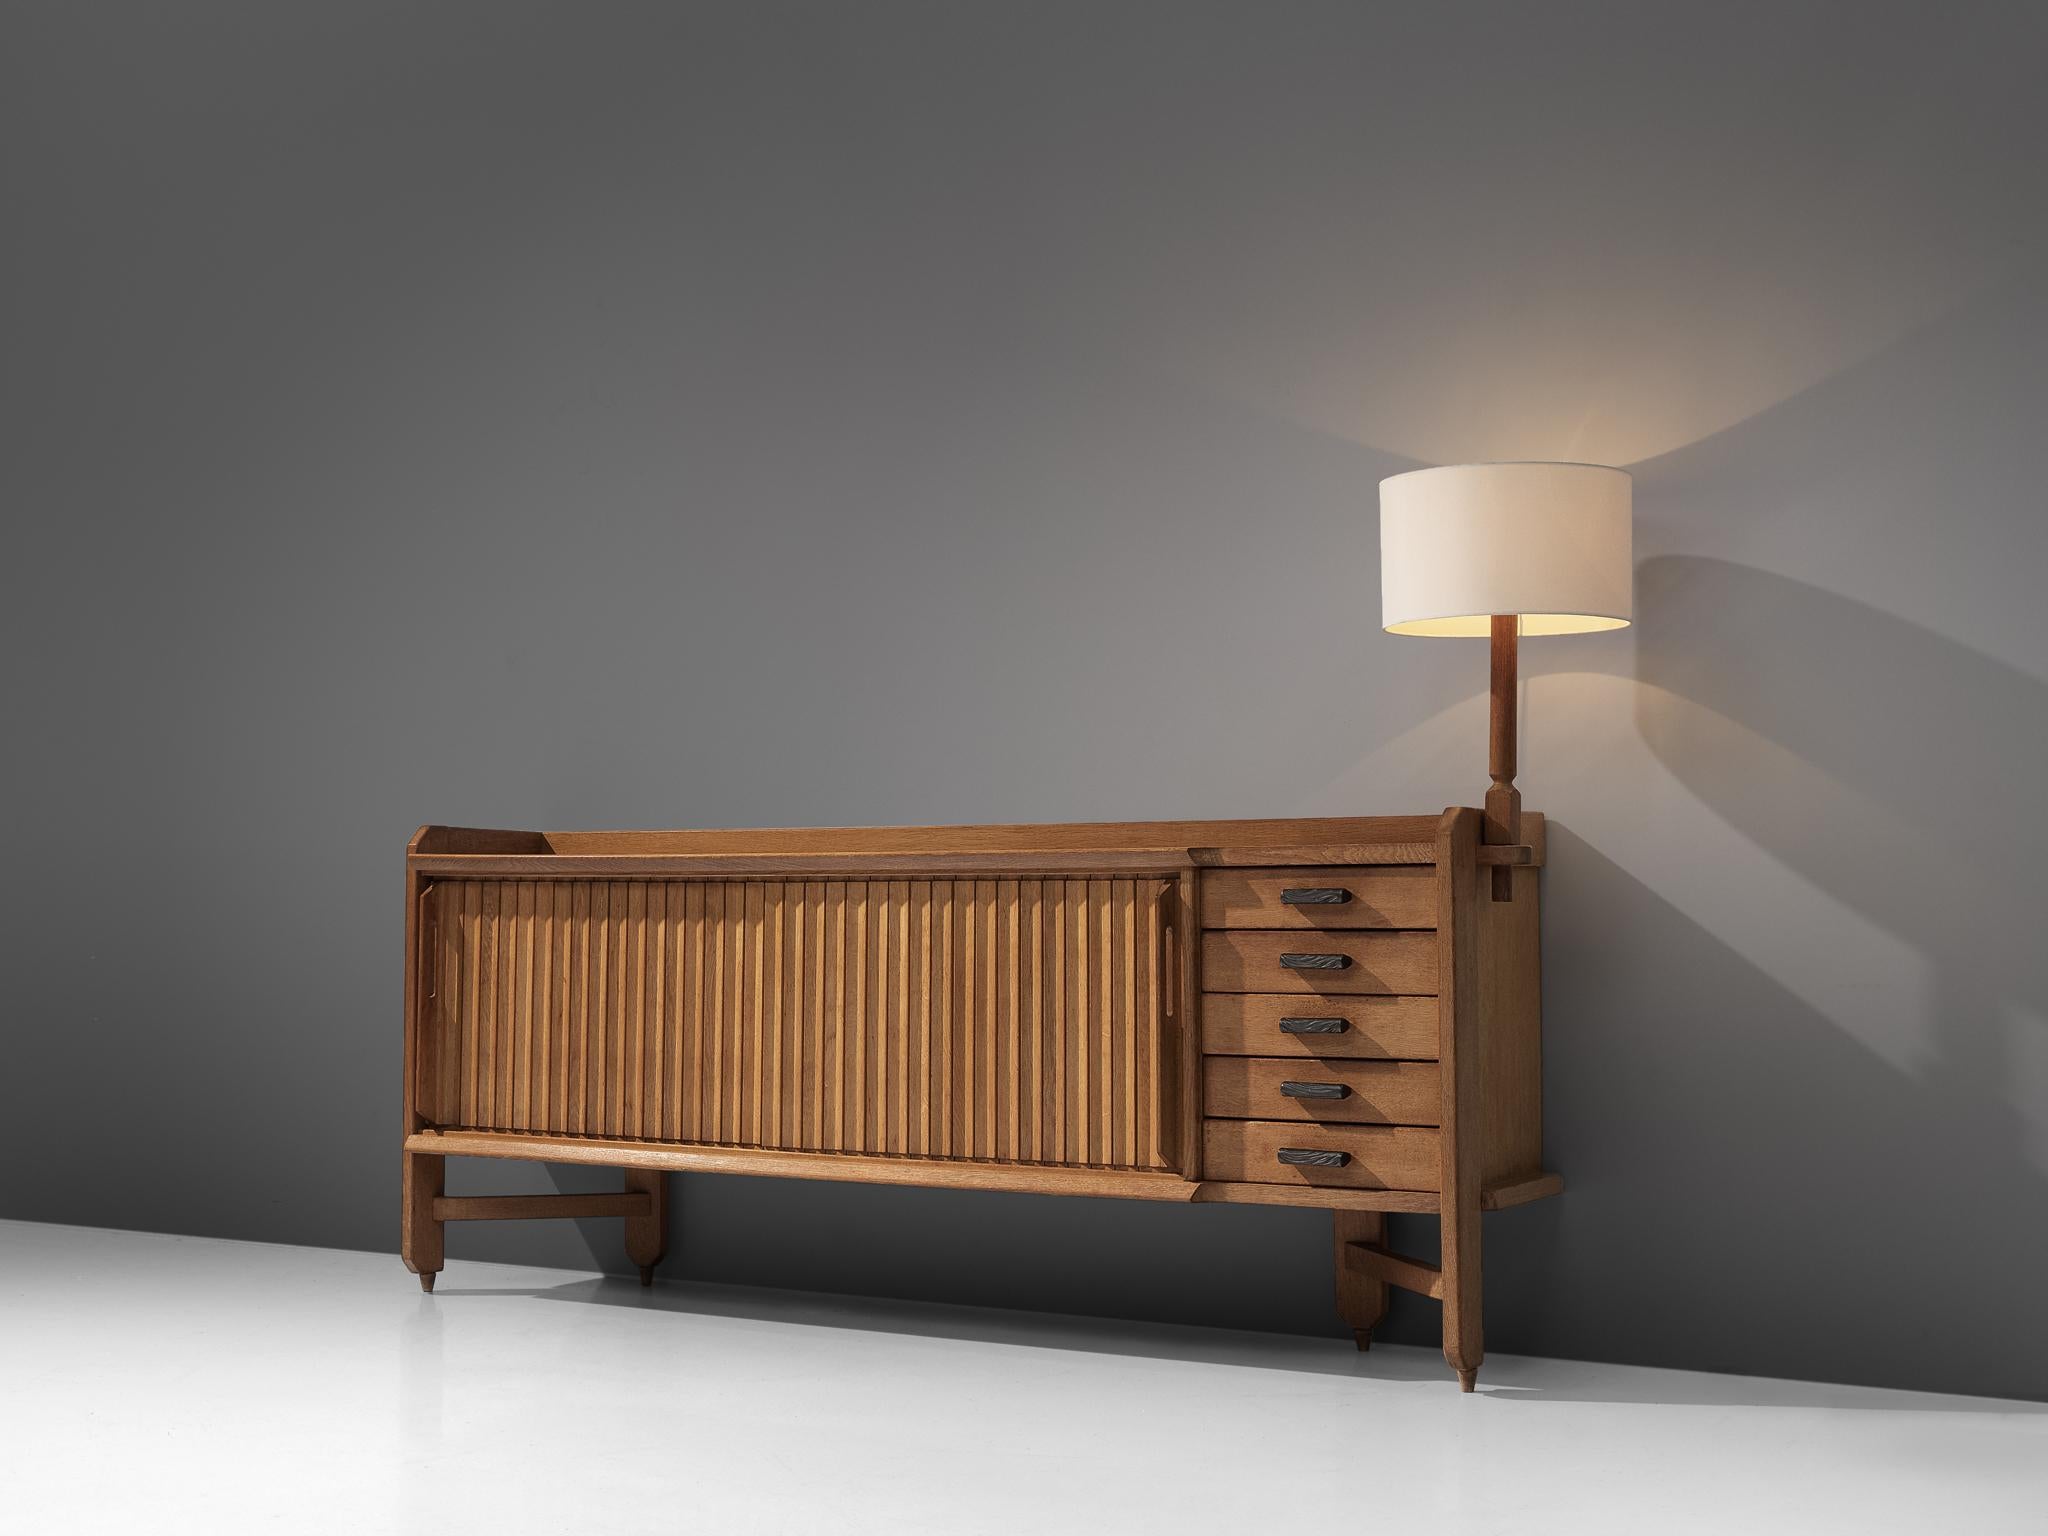 Guillerme et Chambron, credenza 'Saint-Véran', oak and ceramic, France, 1960s.

Characteristic sideboard in solid oak with ceramic tiles and handles. This cabinet holds the characteristics of the French designer duo Guillerme & Chambron. The base